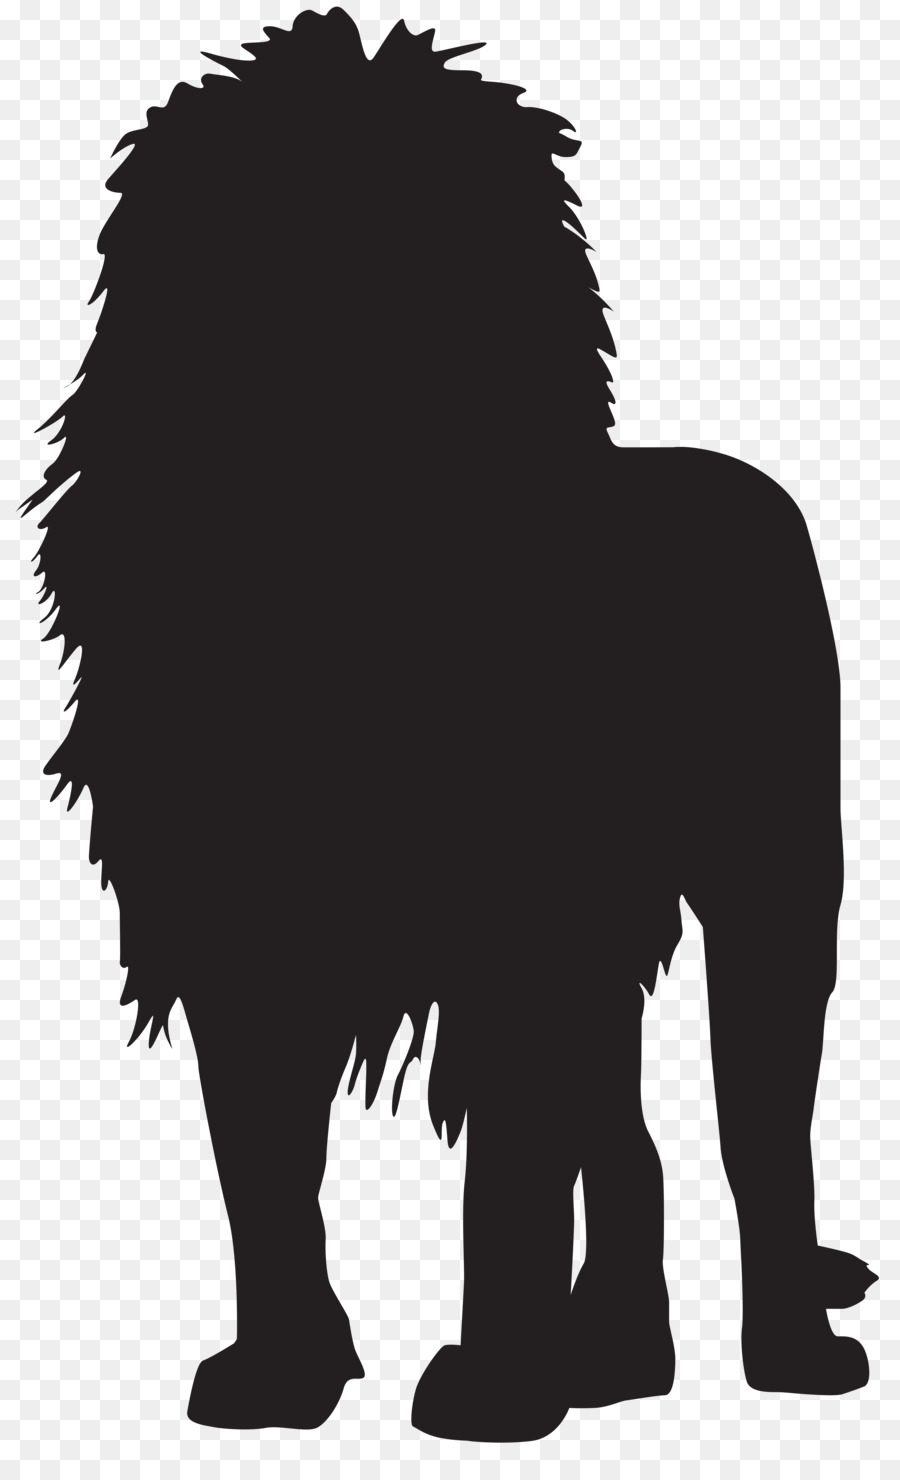 Lion King Silhouette by AdamV